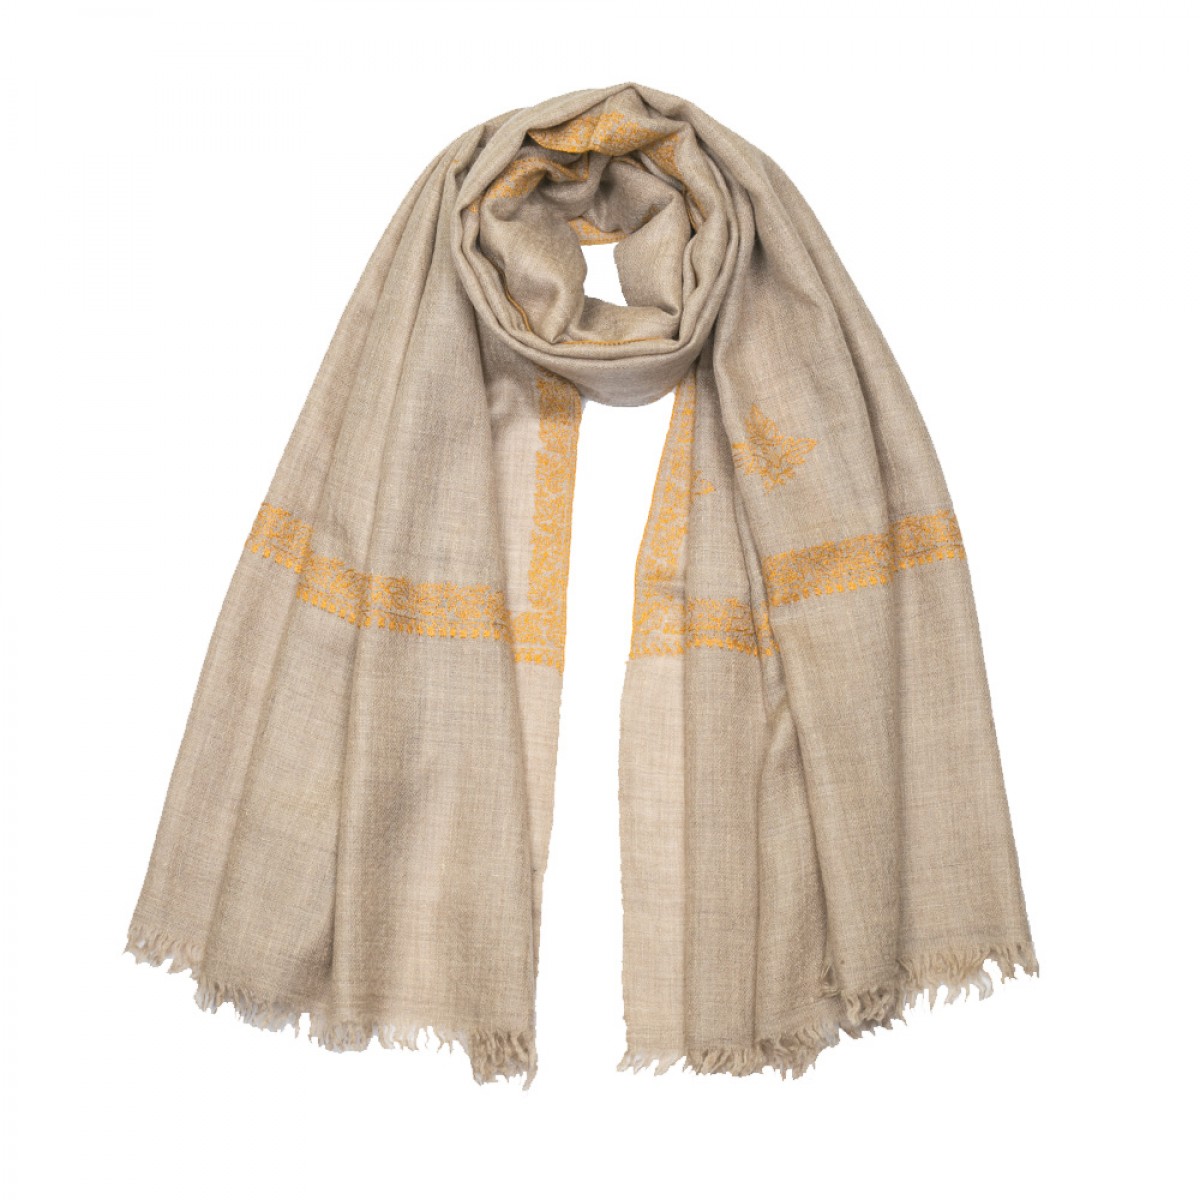 Embroidered Pashmina stole - Natural & Mustard